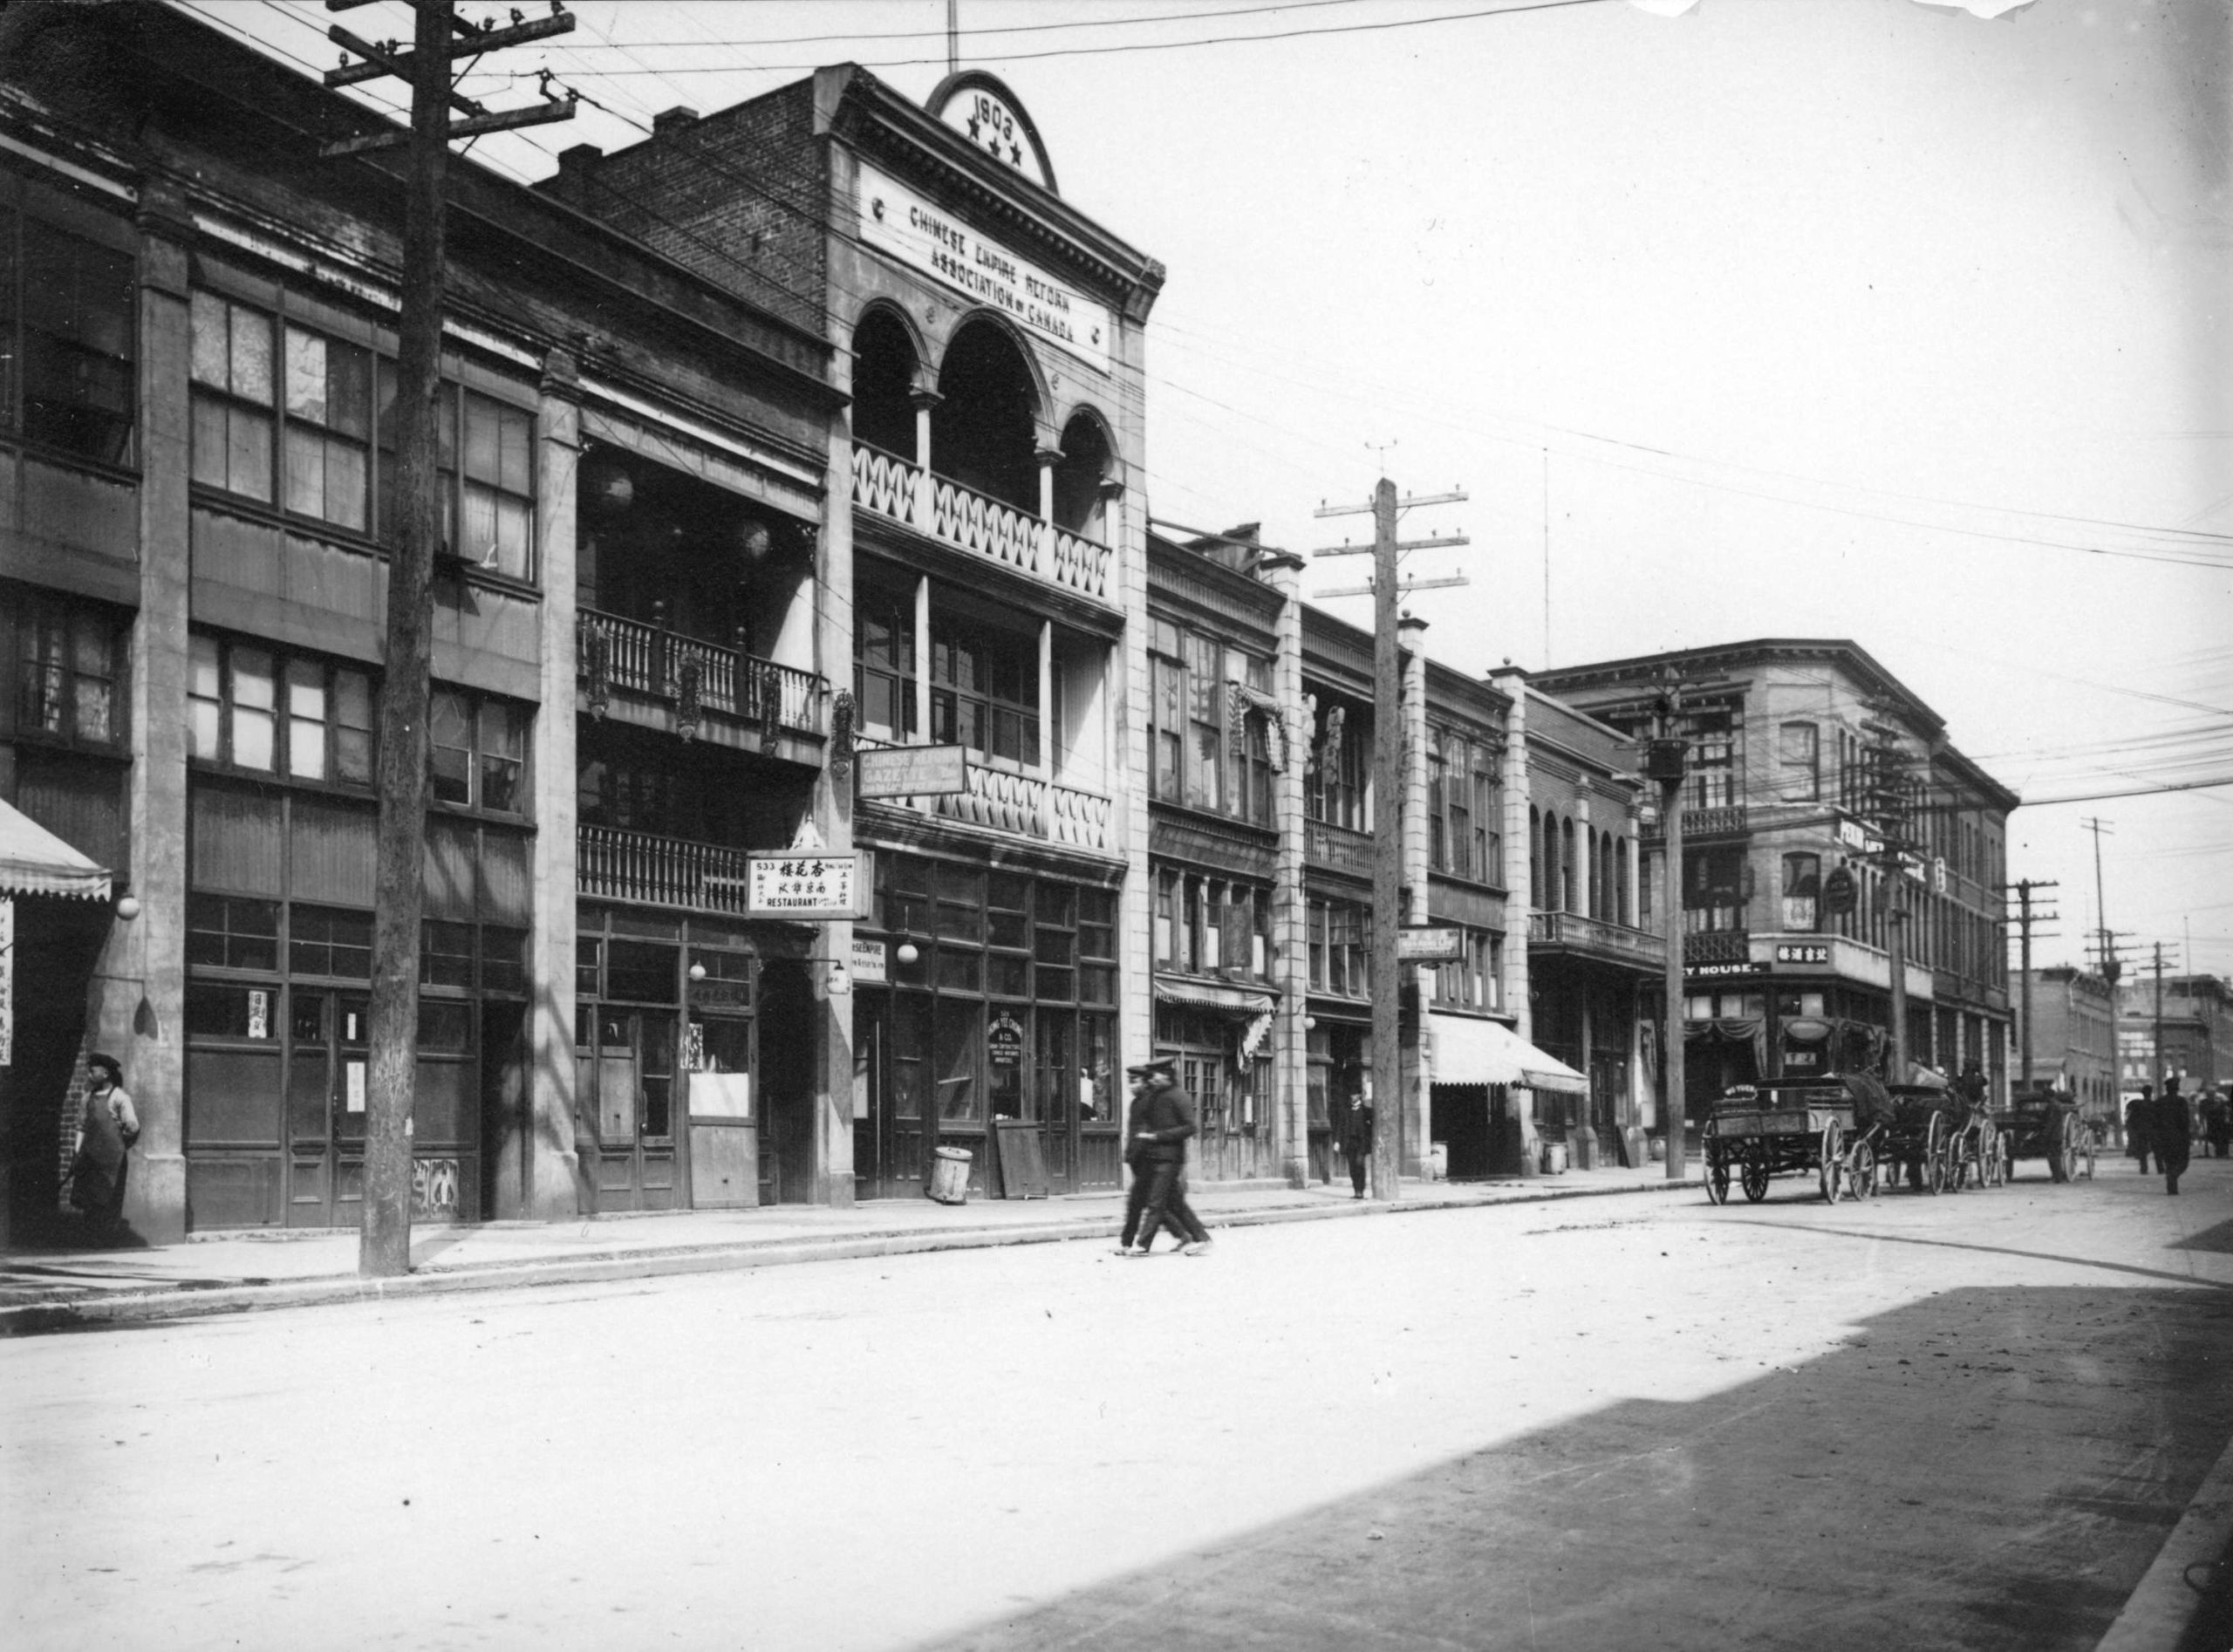 A city street in 1907. A few carriages and pedestrians go down the street past storefronts.